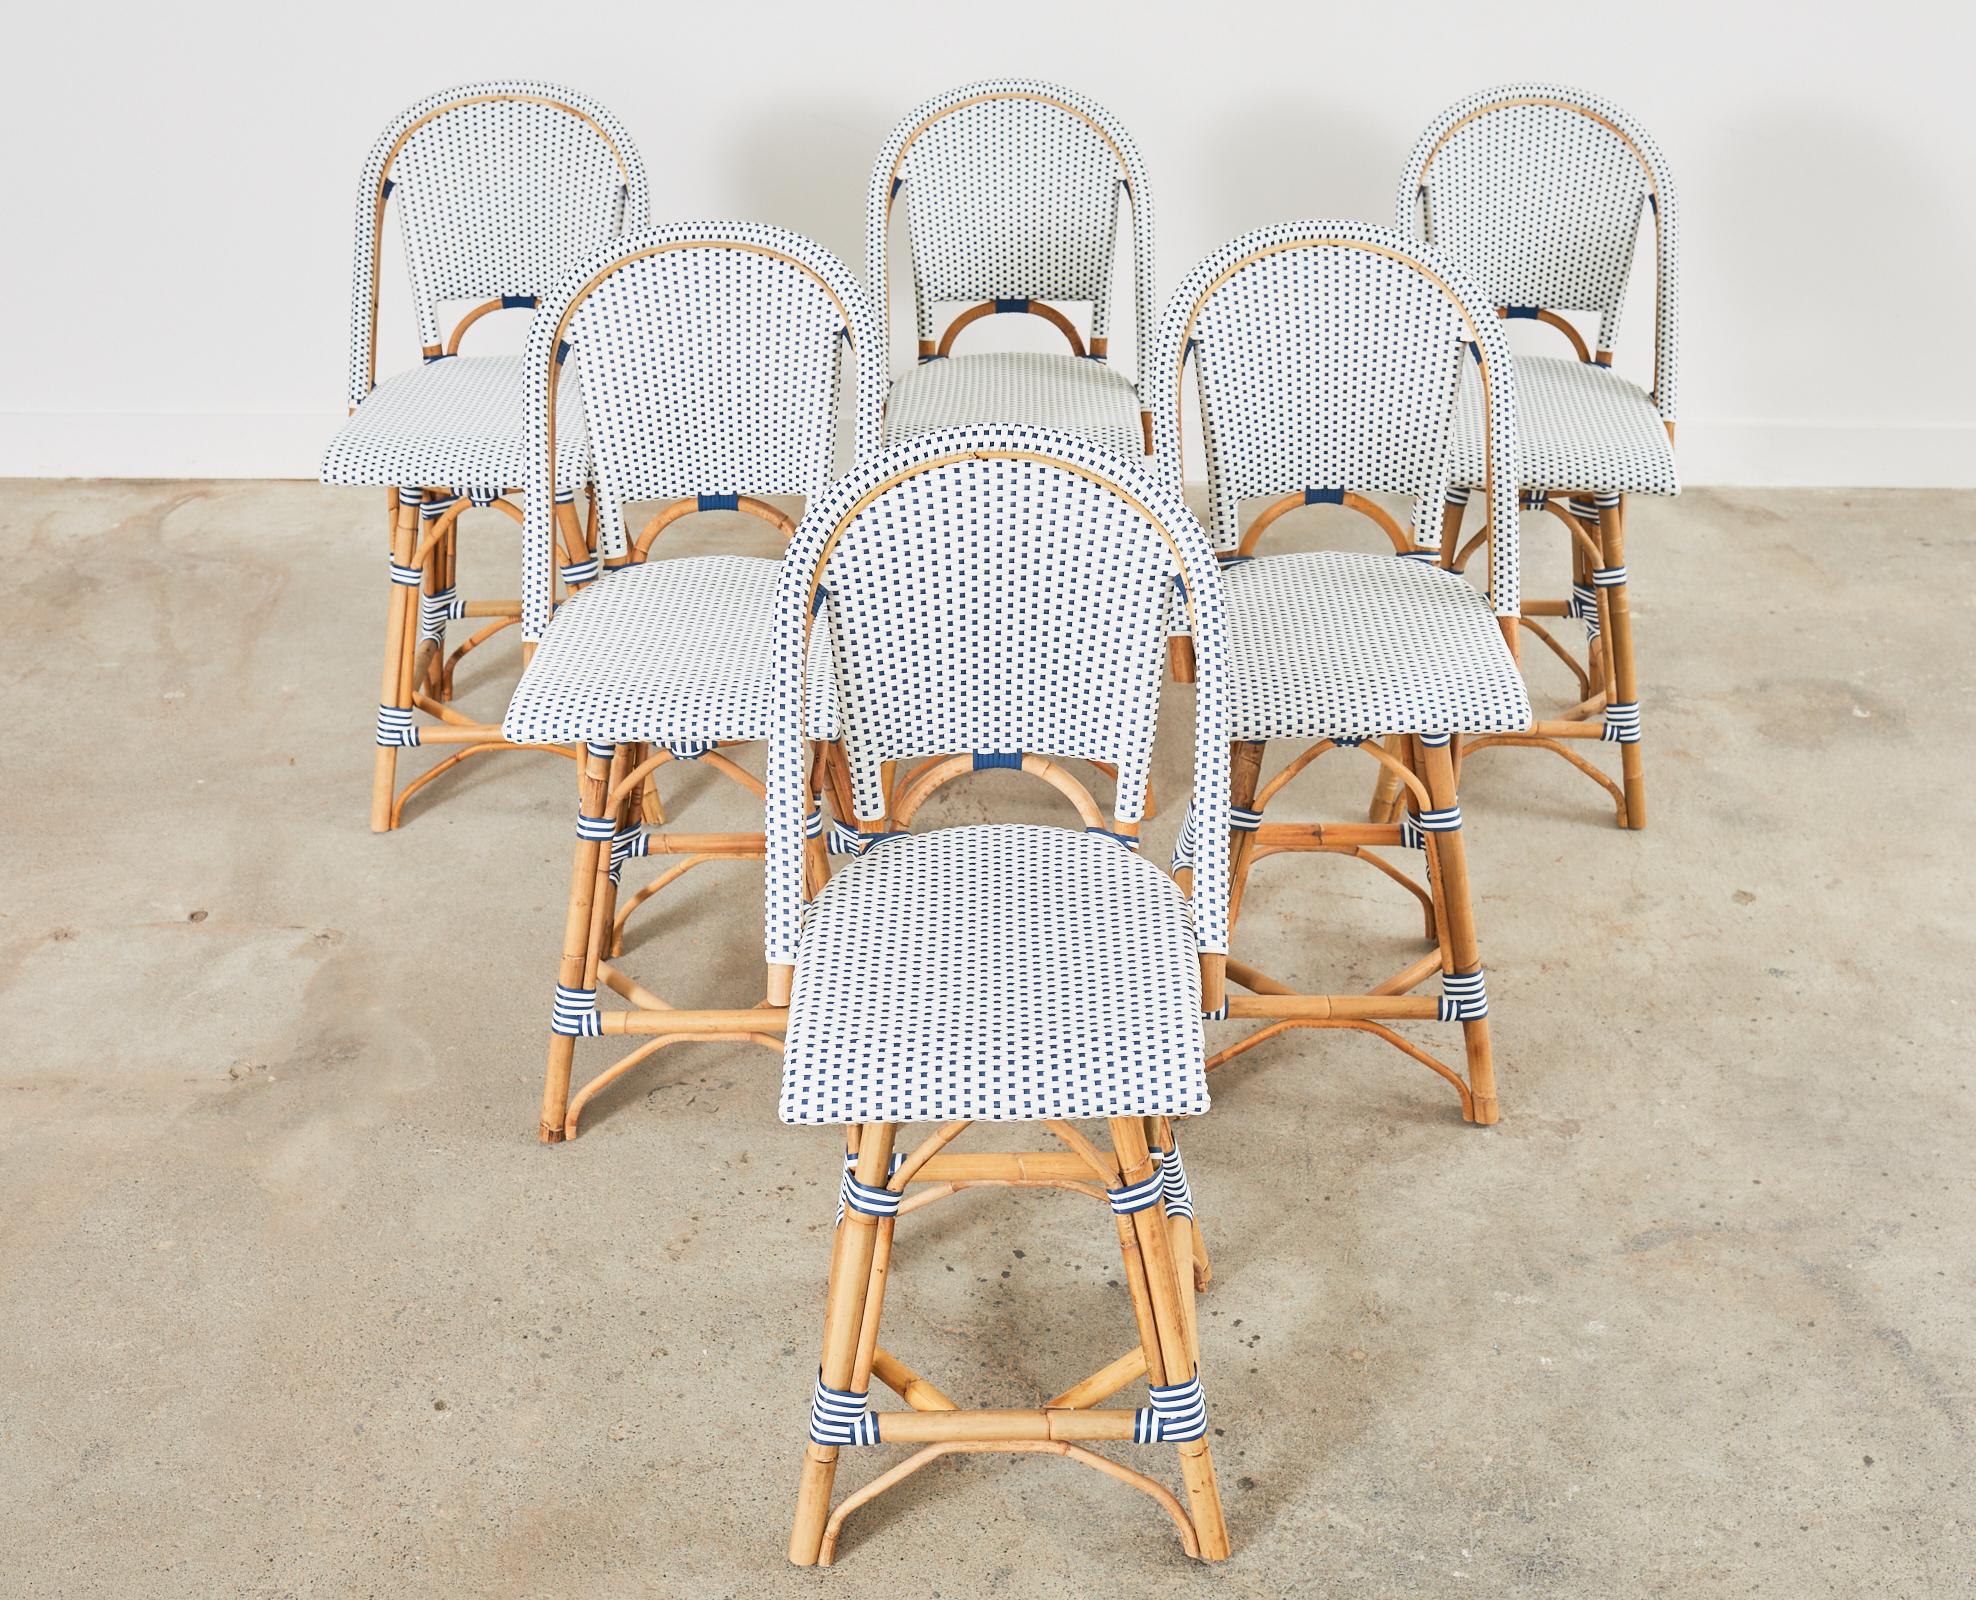 Charming set of six Parisian bistro cafe-style counter height bar stools by Serena and Lily. The attractive set features organic modern natural rattan frames bent by hand with woven resin seats. Each chair has a swivel seat in a nautical blue and